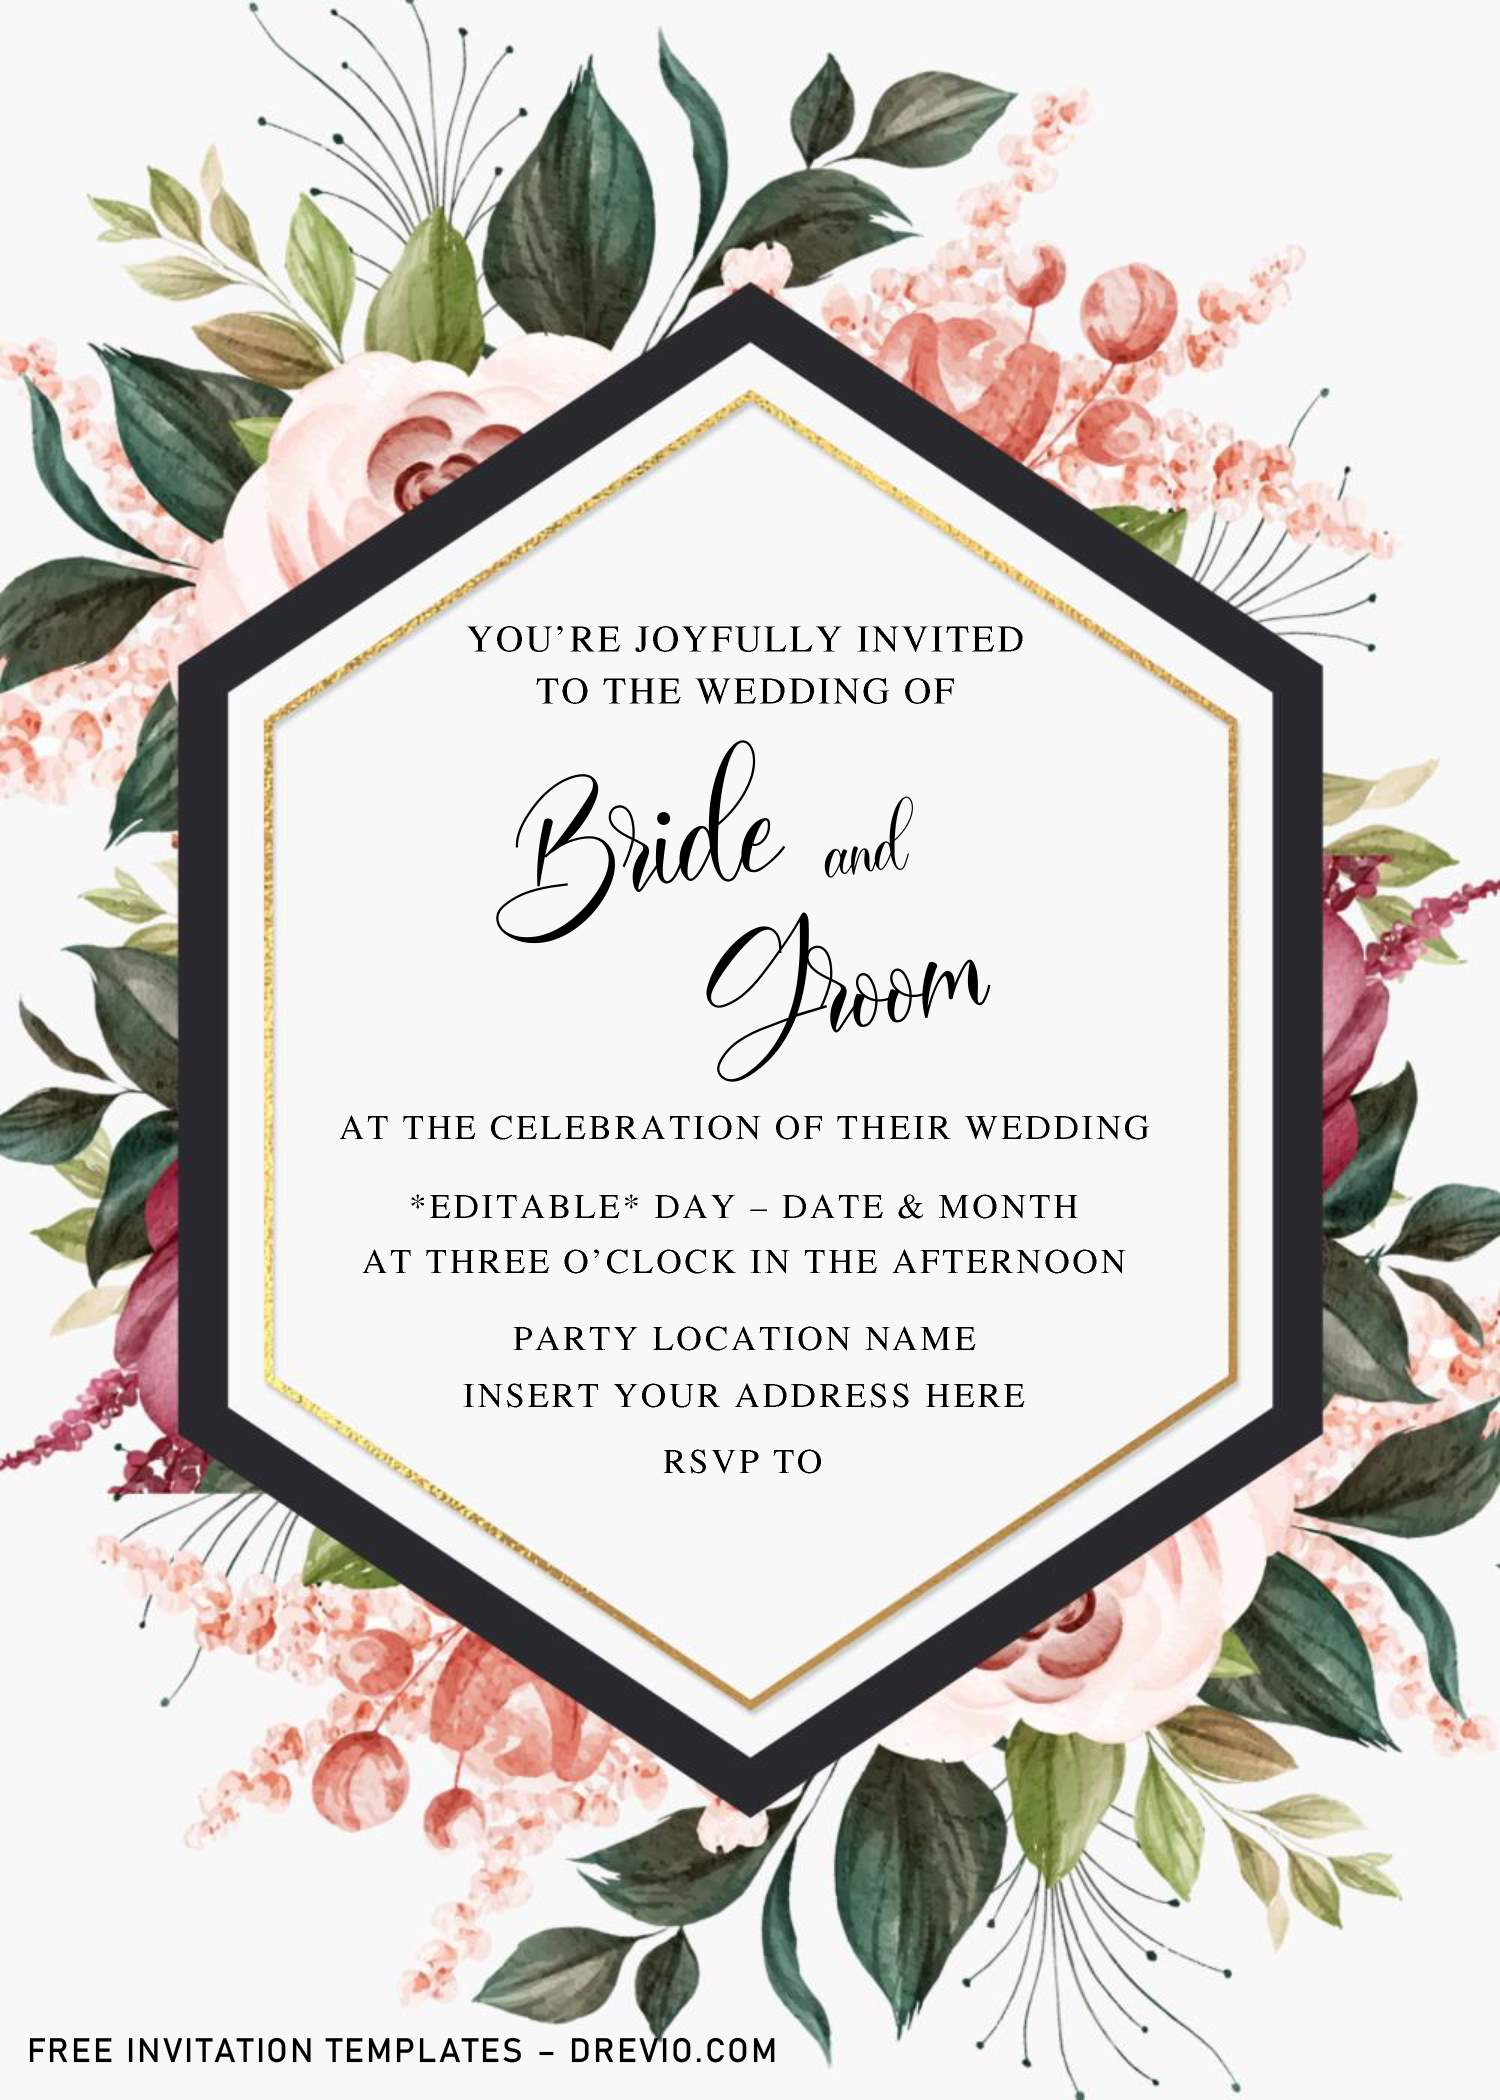 Free Burgundy Floral Wedding Invitation Templates For Word Download Hundreds Free Printable Birthday Invitation Templates